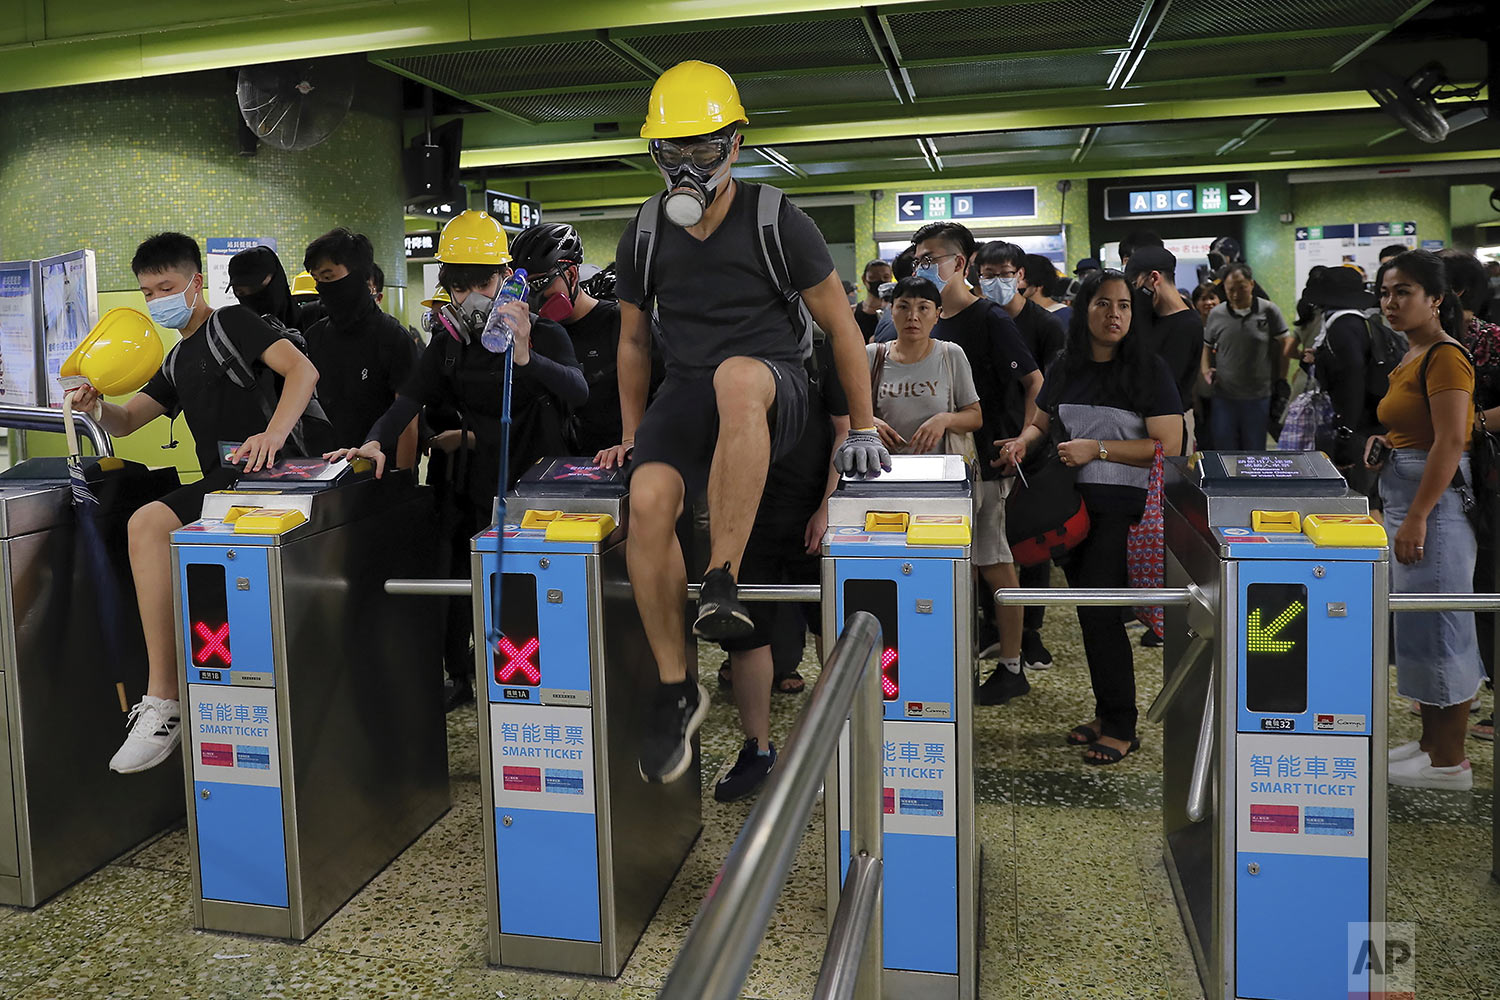  Protesters jump over MTR gates as they move to another destination during the anti-extradition bill protest in Hong Kong, Sunday, Aug. 11, 2019.  (AP Photo/Kin Cheung) 